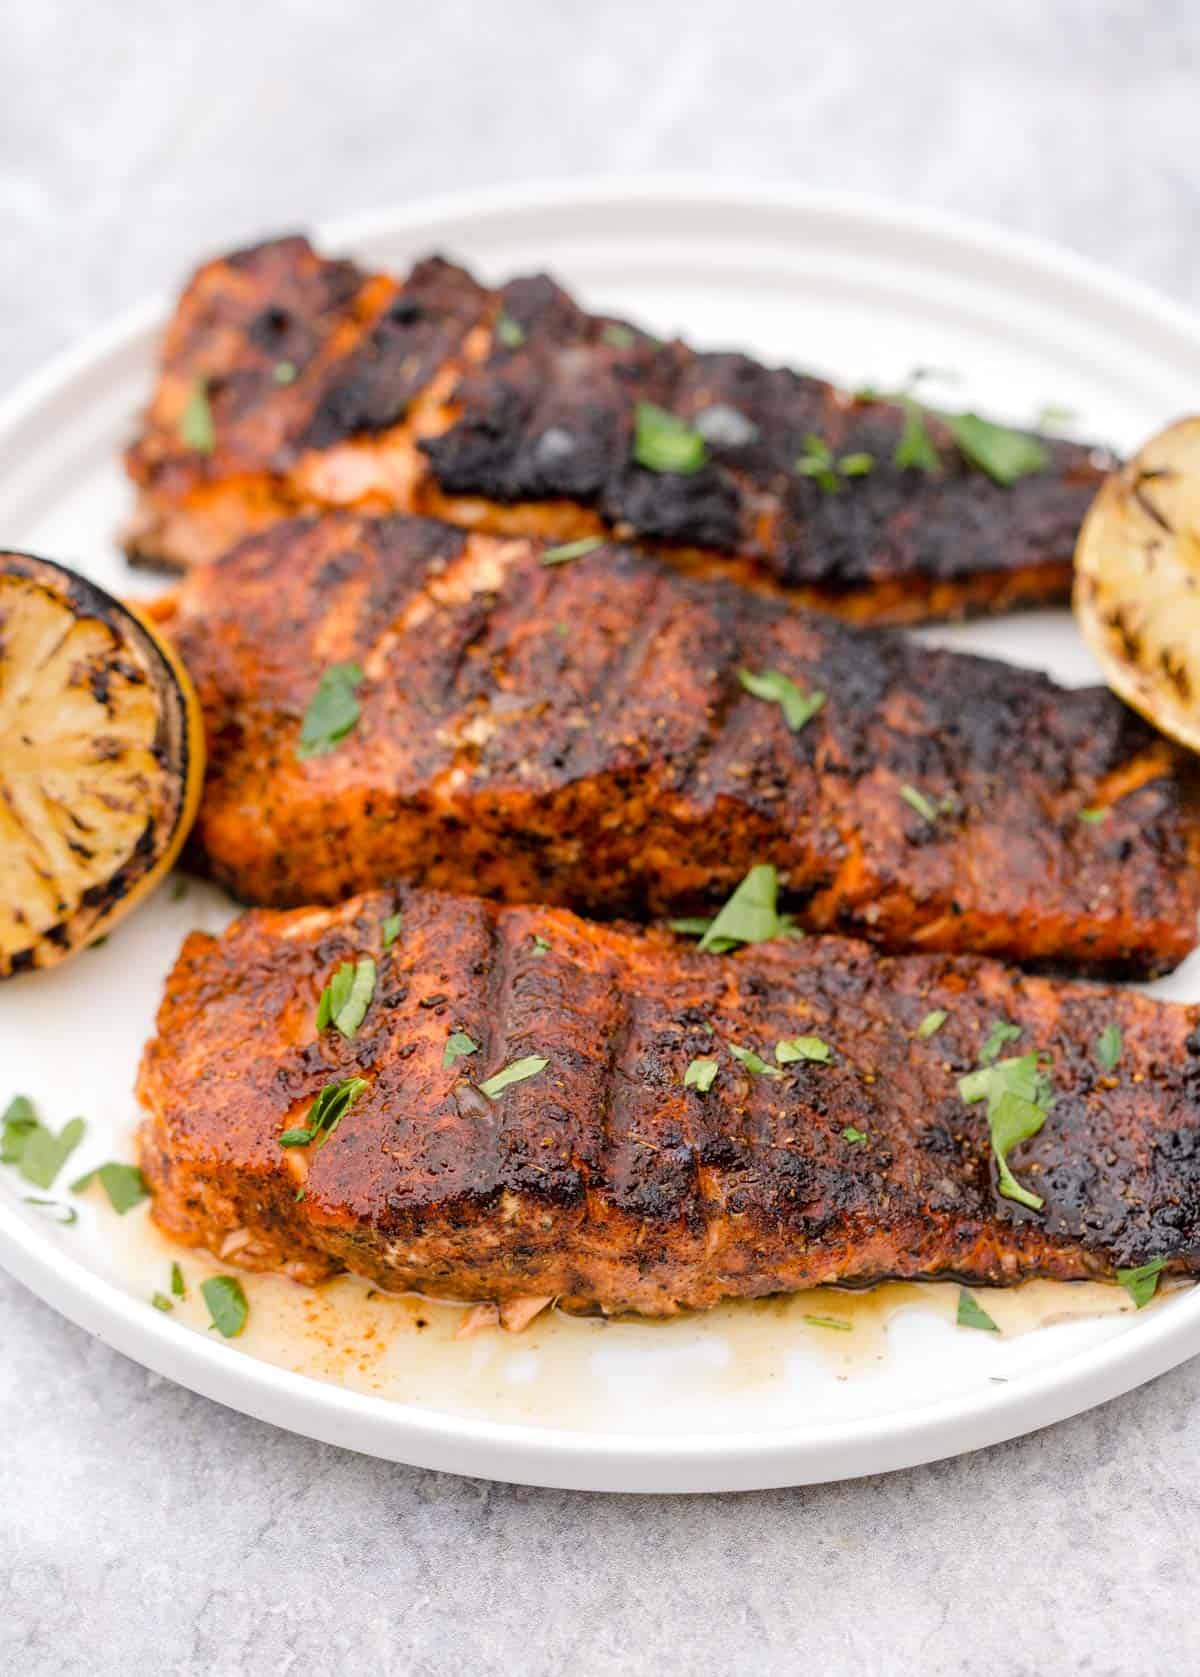 Grilled Blackened Salmon on plate with grilled lemon.